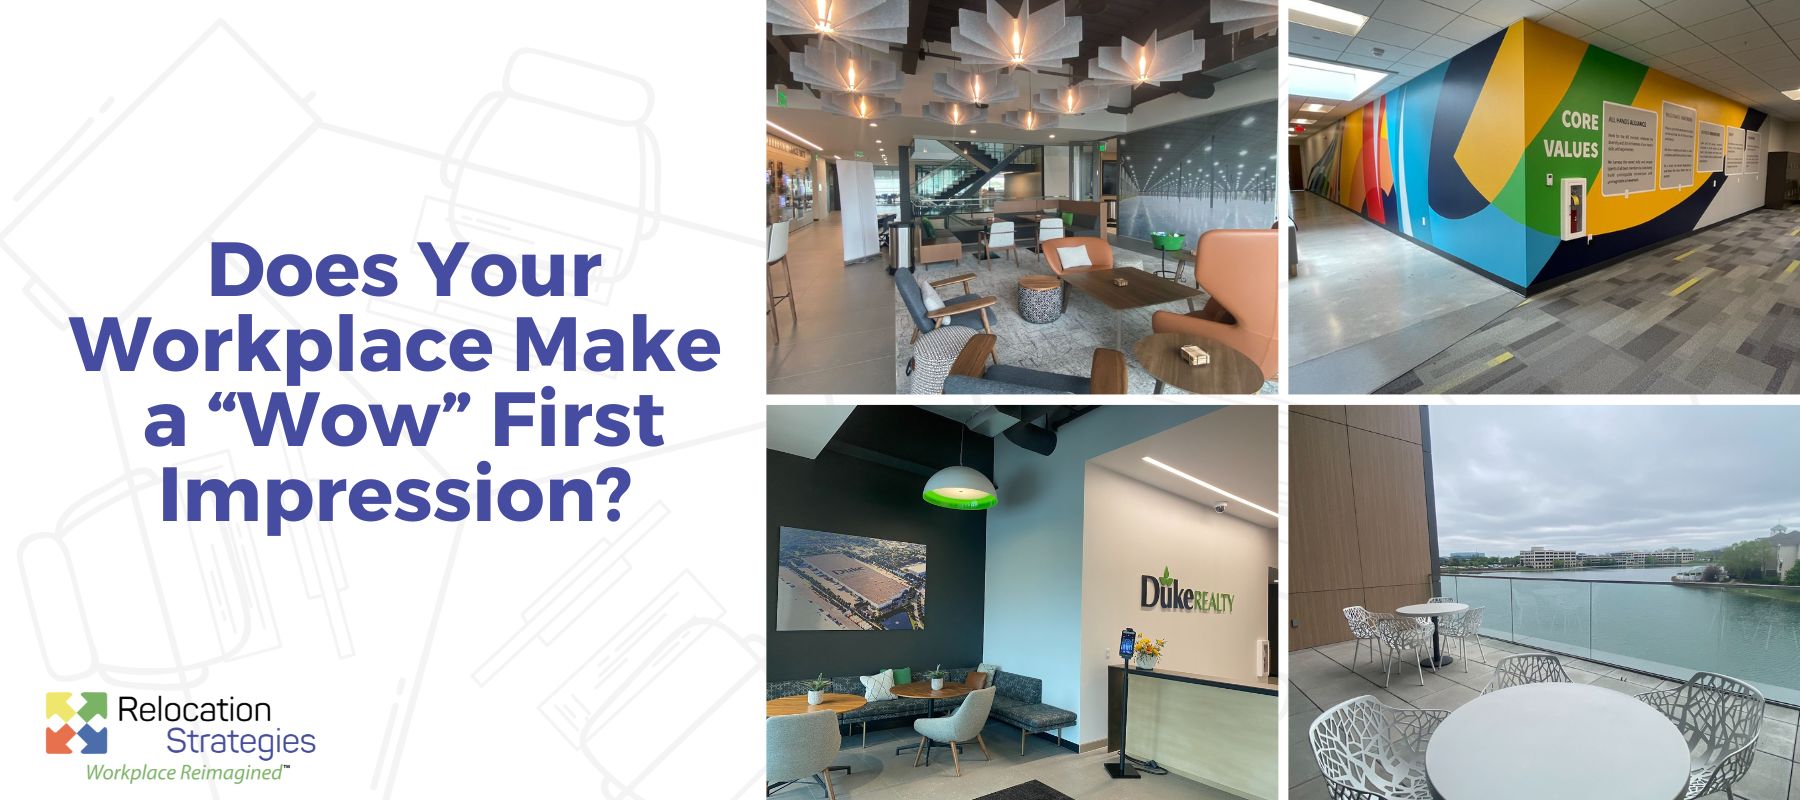 Does Your Workplace make a “Wow” First Impression?